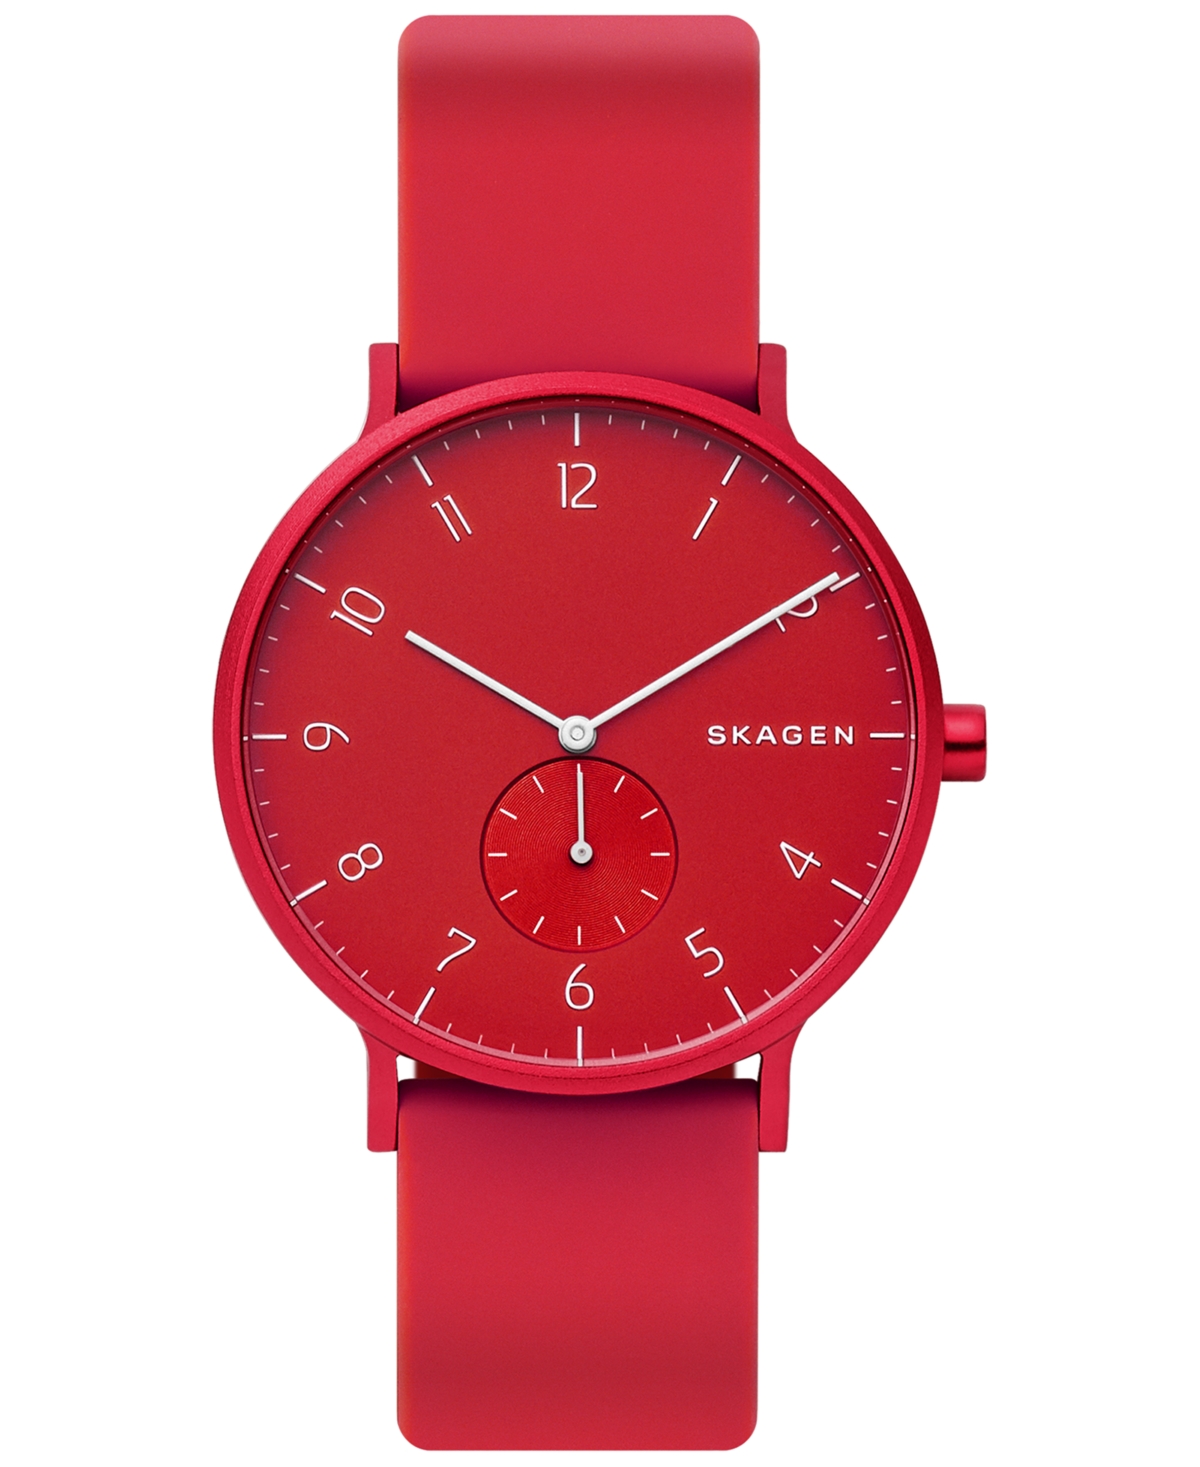 Aaren Kulor Aluminum Silicone Strap Watch 41mm Created for Macy's - Red